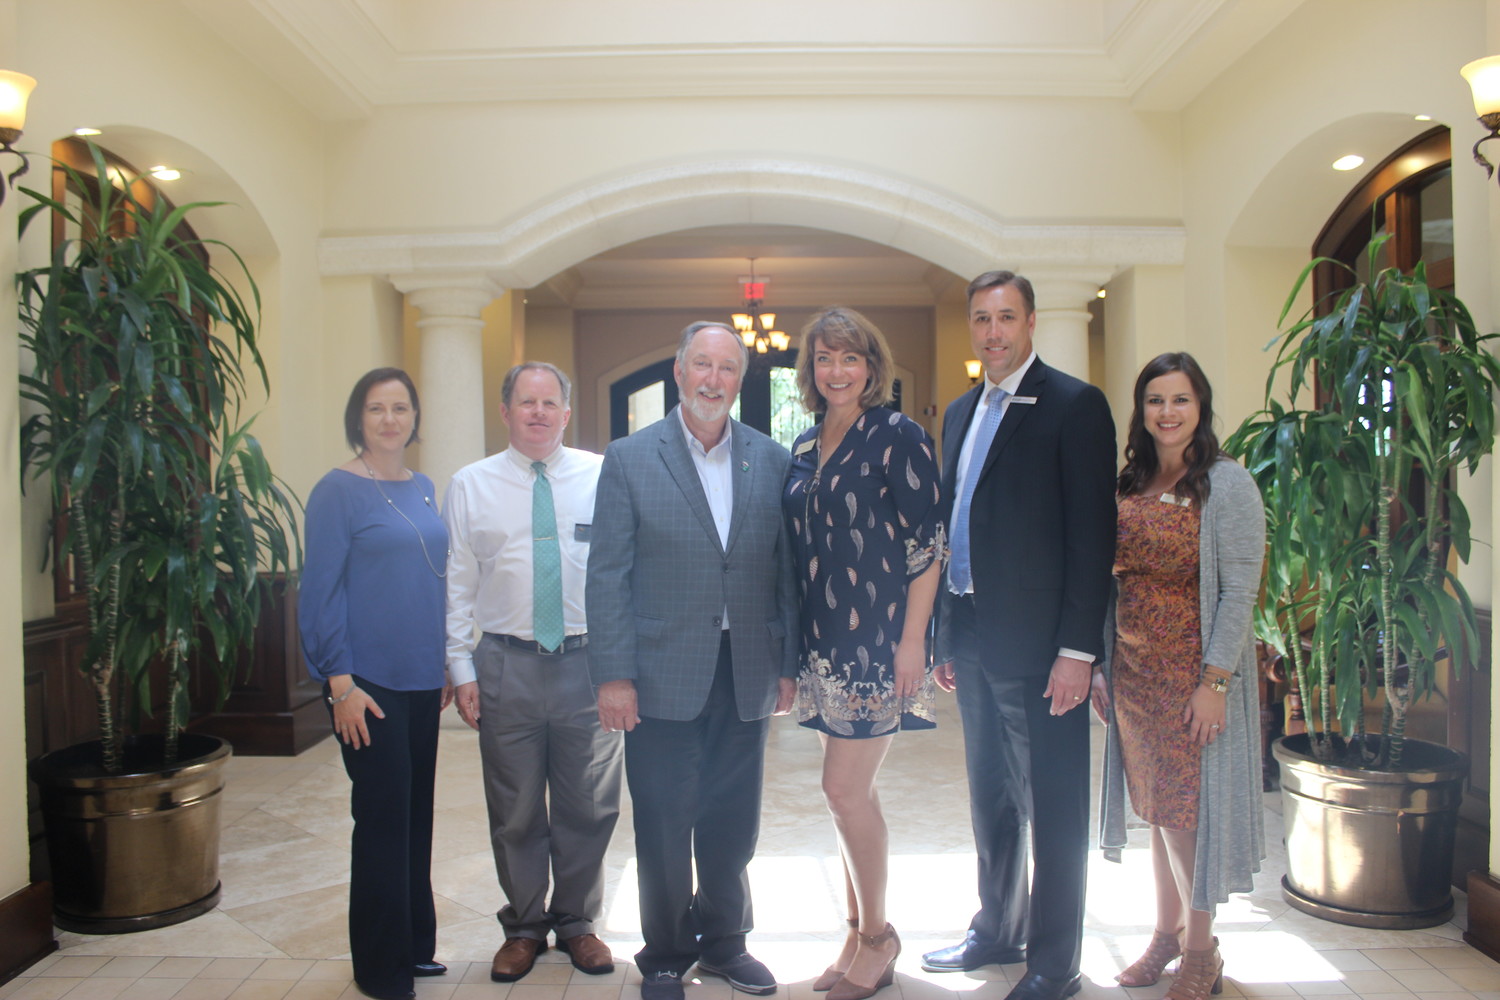 Isabelle Rodriguez-Renault, Rob Schlingmann, Dr. Tony Parker, Toni Boudreaux, Brian Zehren and Brittany Wynne gather after the “Chamber at Noon” event on May 23.